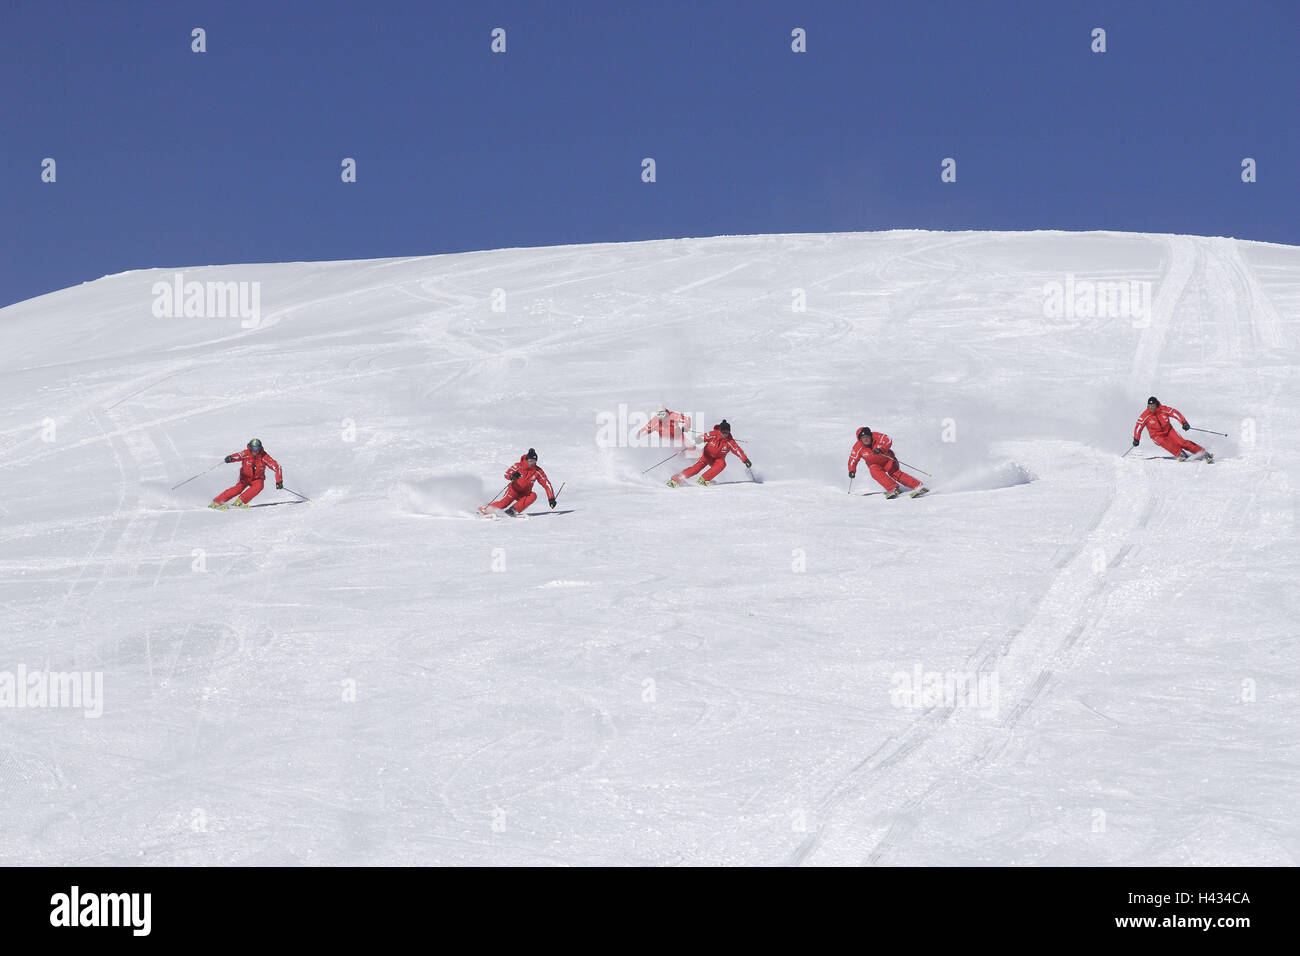 Ski runway, skier, six, drive, no model release, Austria, Tyrol, Ladis, alps, mountains, mountains, season, winter, snow, snow-covered, winter sports area, winter sports, skiing area, tourism, tourism, immediately, with each other, suits, ski suits, red, cloudless, ski instructor, Stock Photo